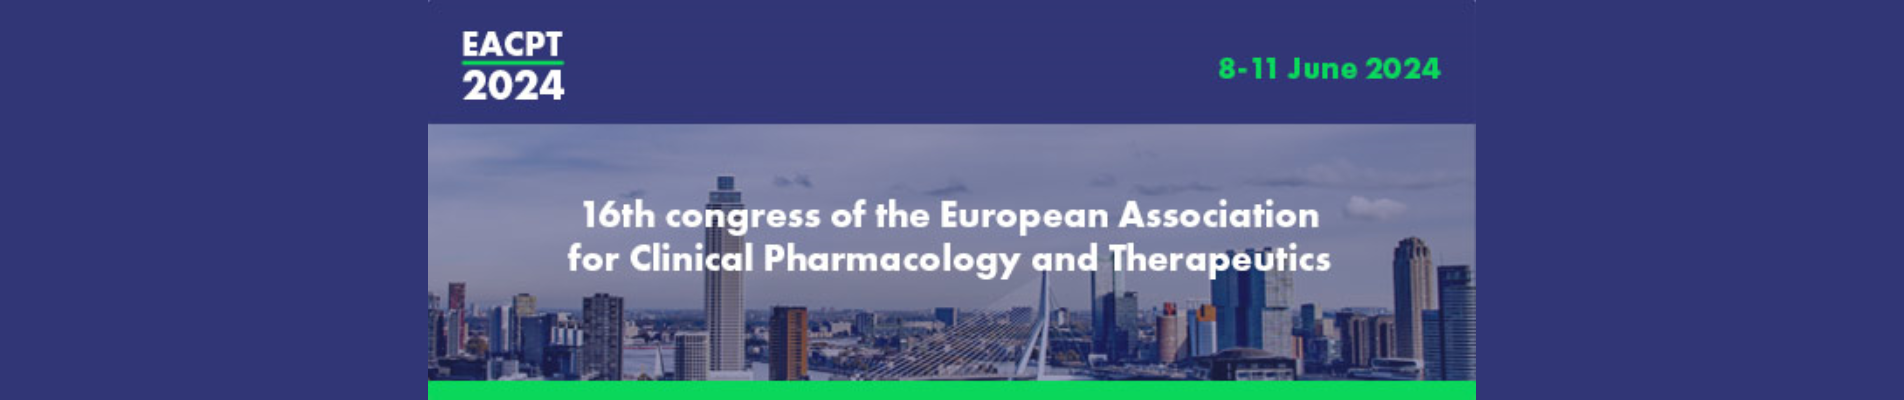 6th congress of the European Association for Clinical Pharmacology and Therapeutics (EACPT 2024)